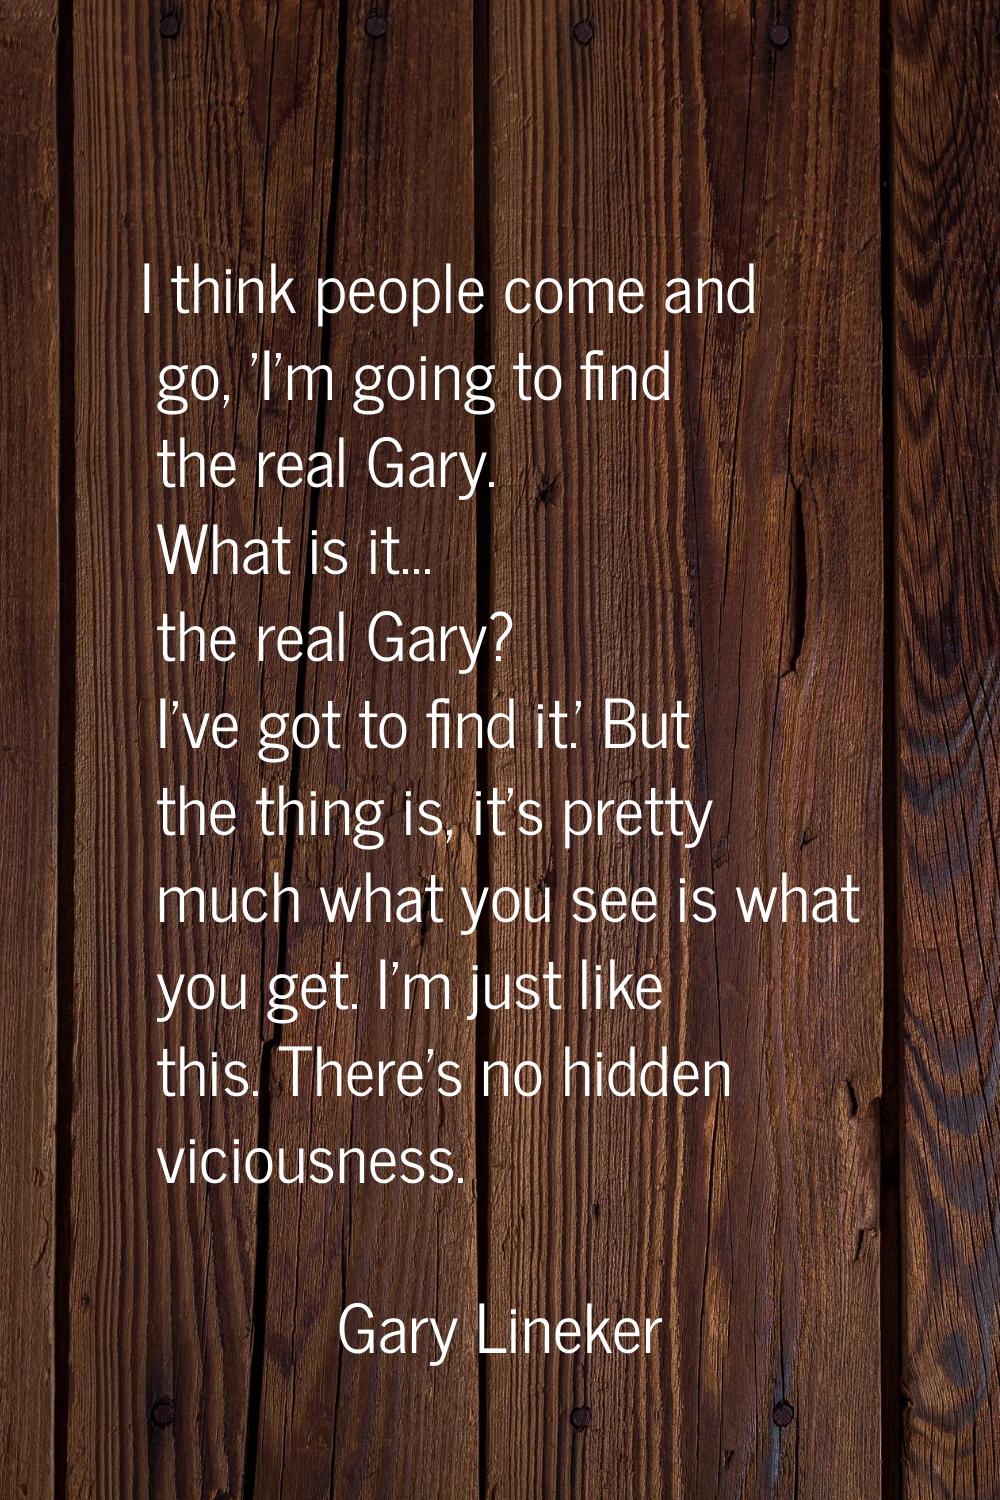 I think people come and go, 'I'm going to find the real Gary. What is it... the real Gary? I've got